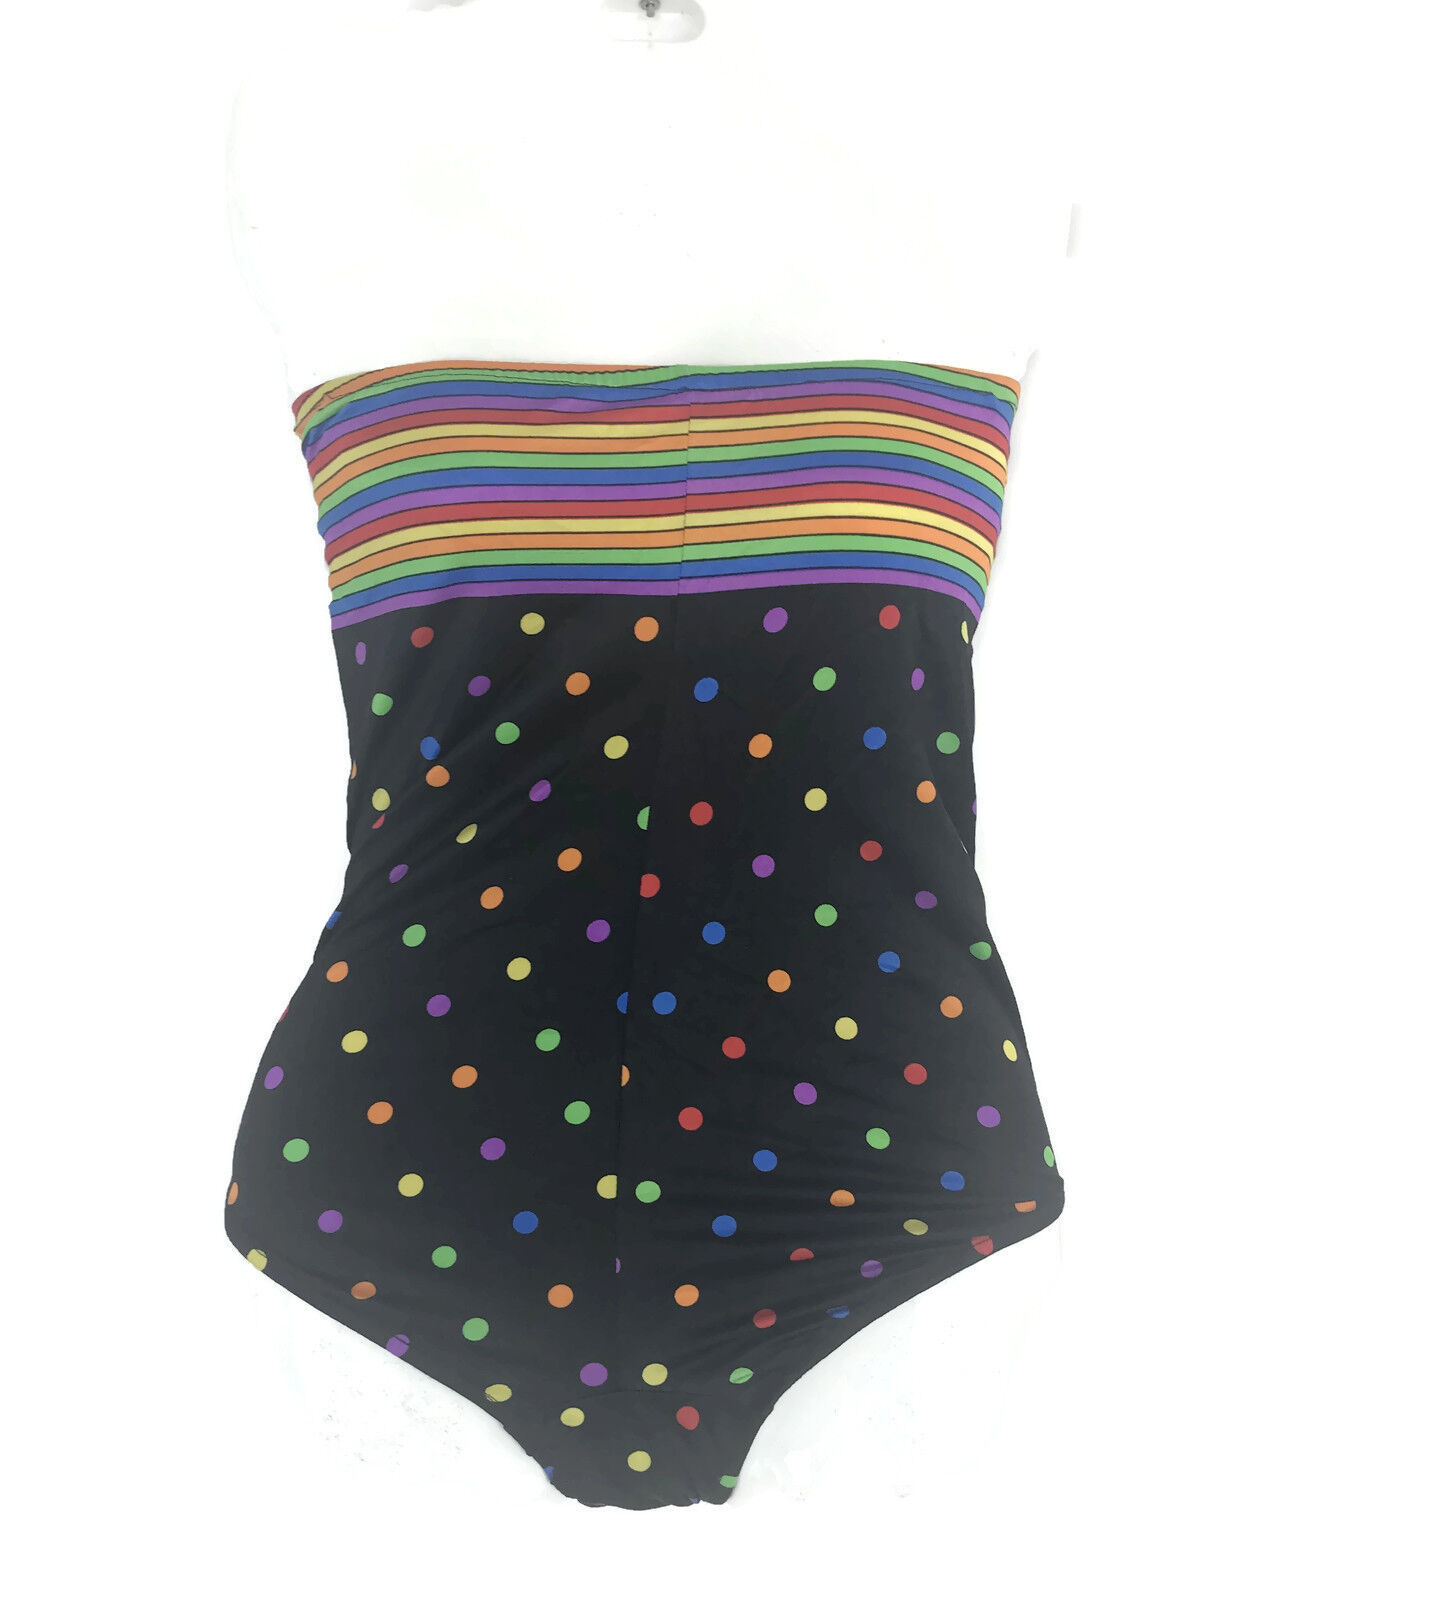 Primary image for Girl's Swimsuit Black Rainbow Polka Dot One Piece Maillot Sz 13/14 Vintage 1980s